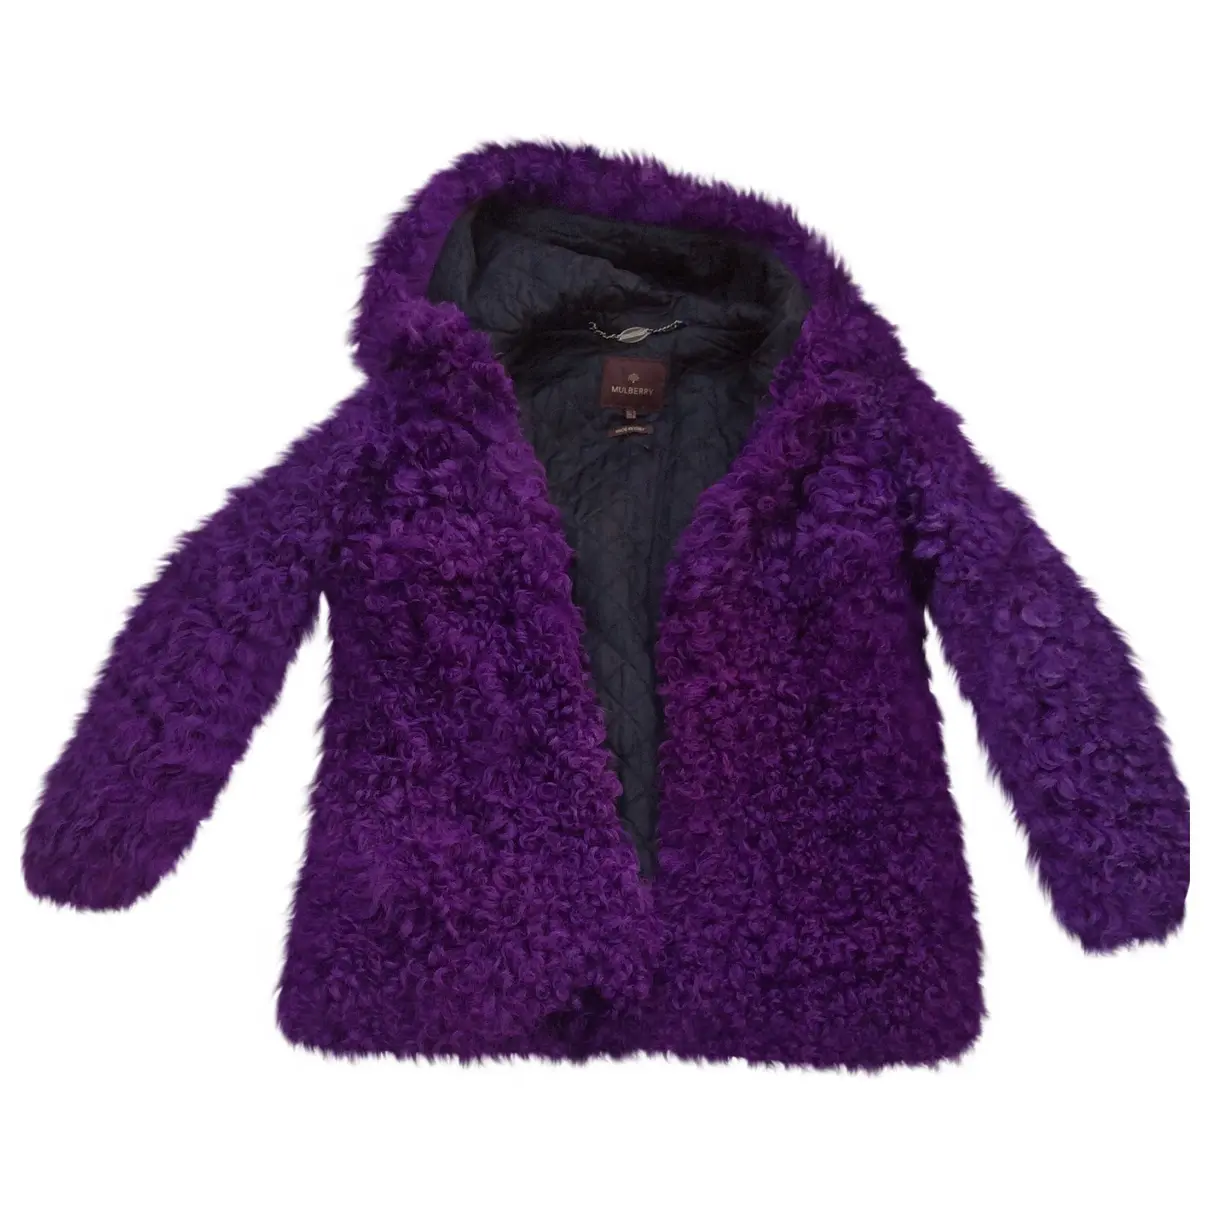 Shearling coat Mulberry